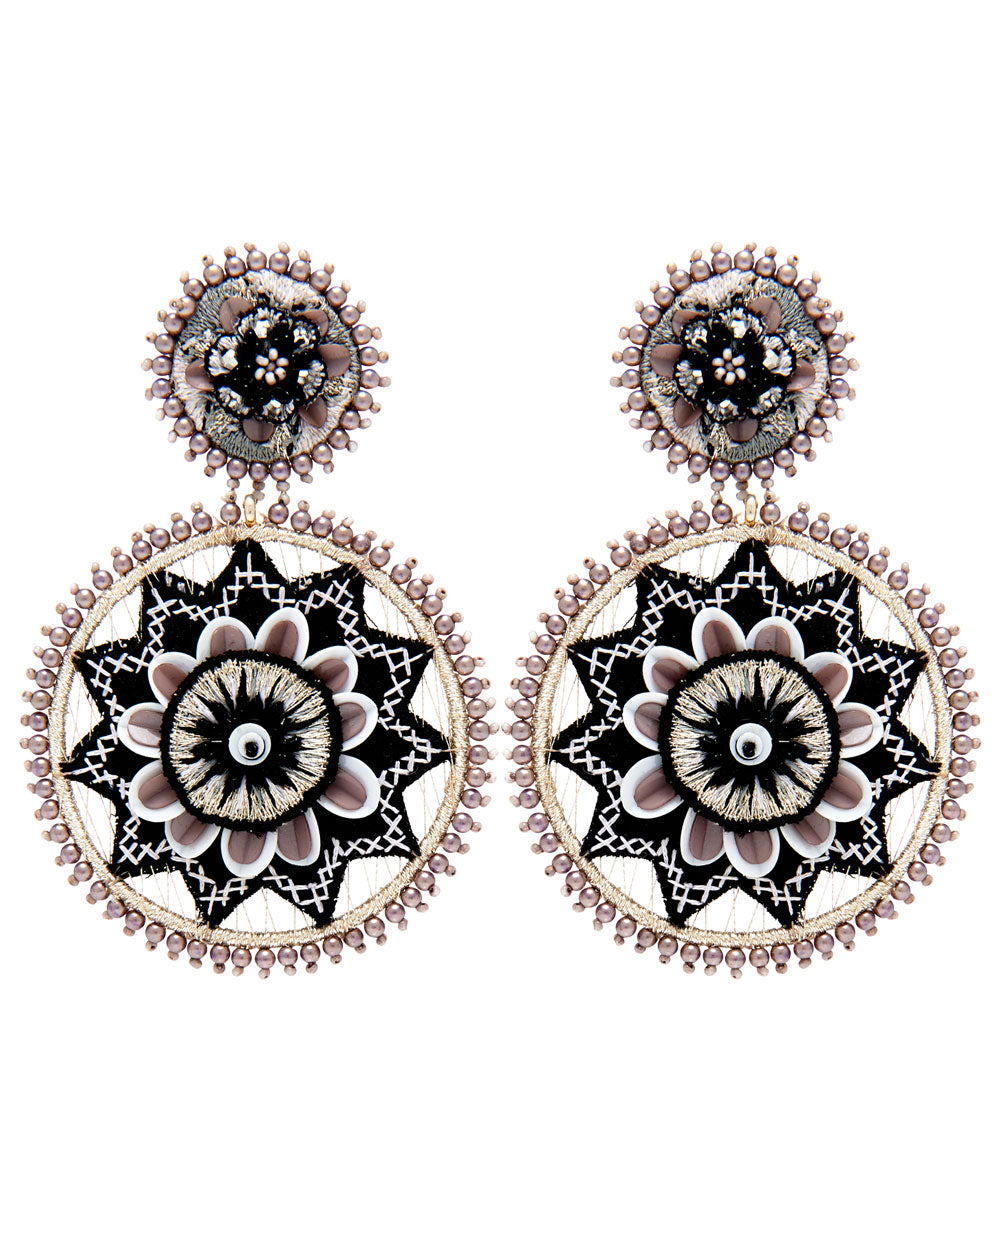 Black and White Double Drop Jacey Earrings